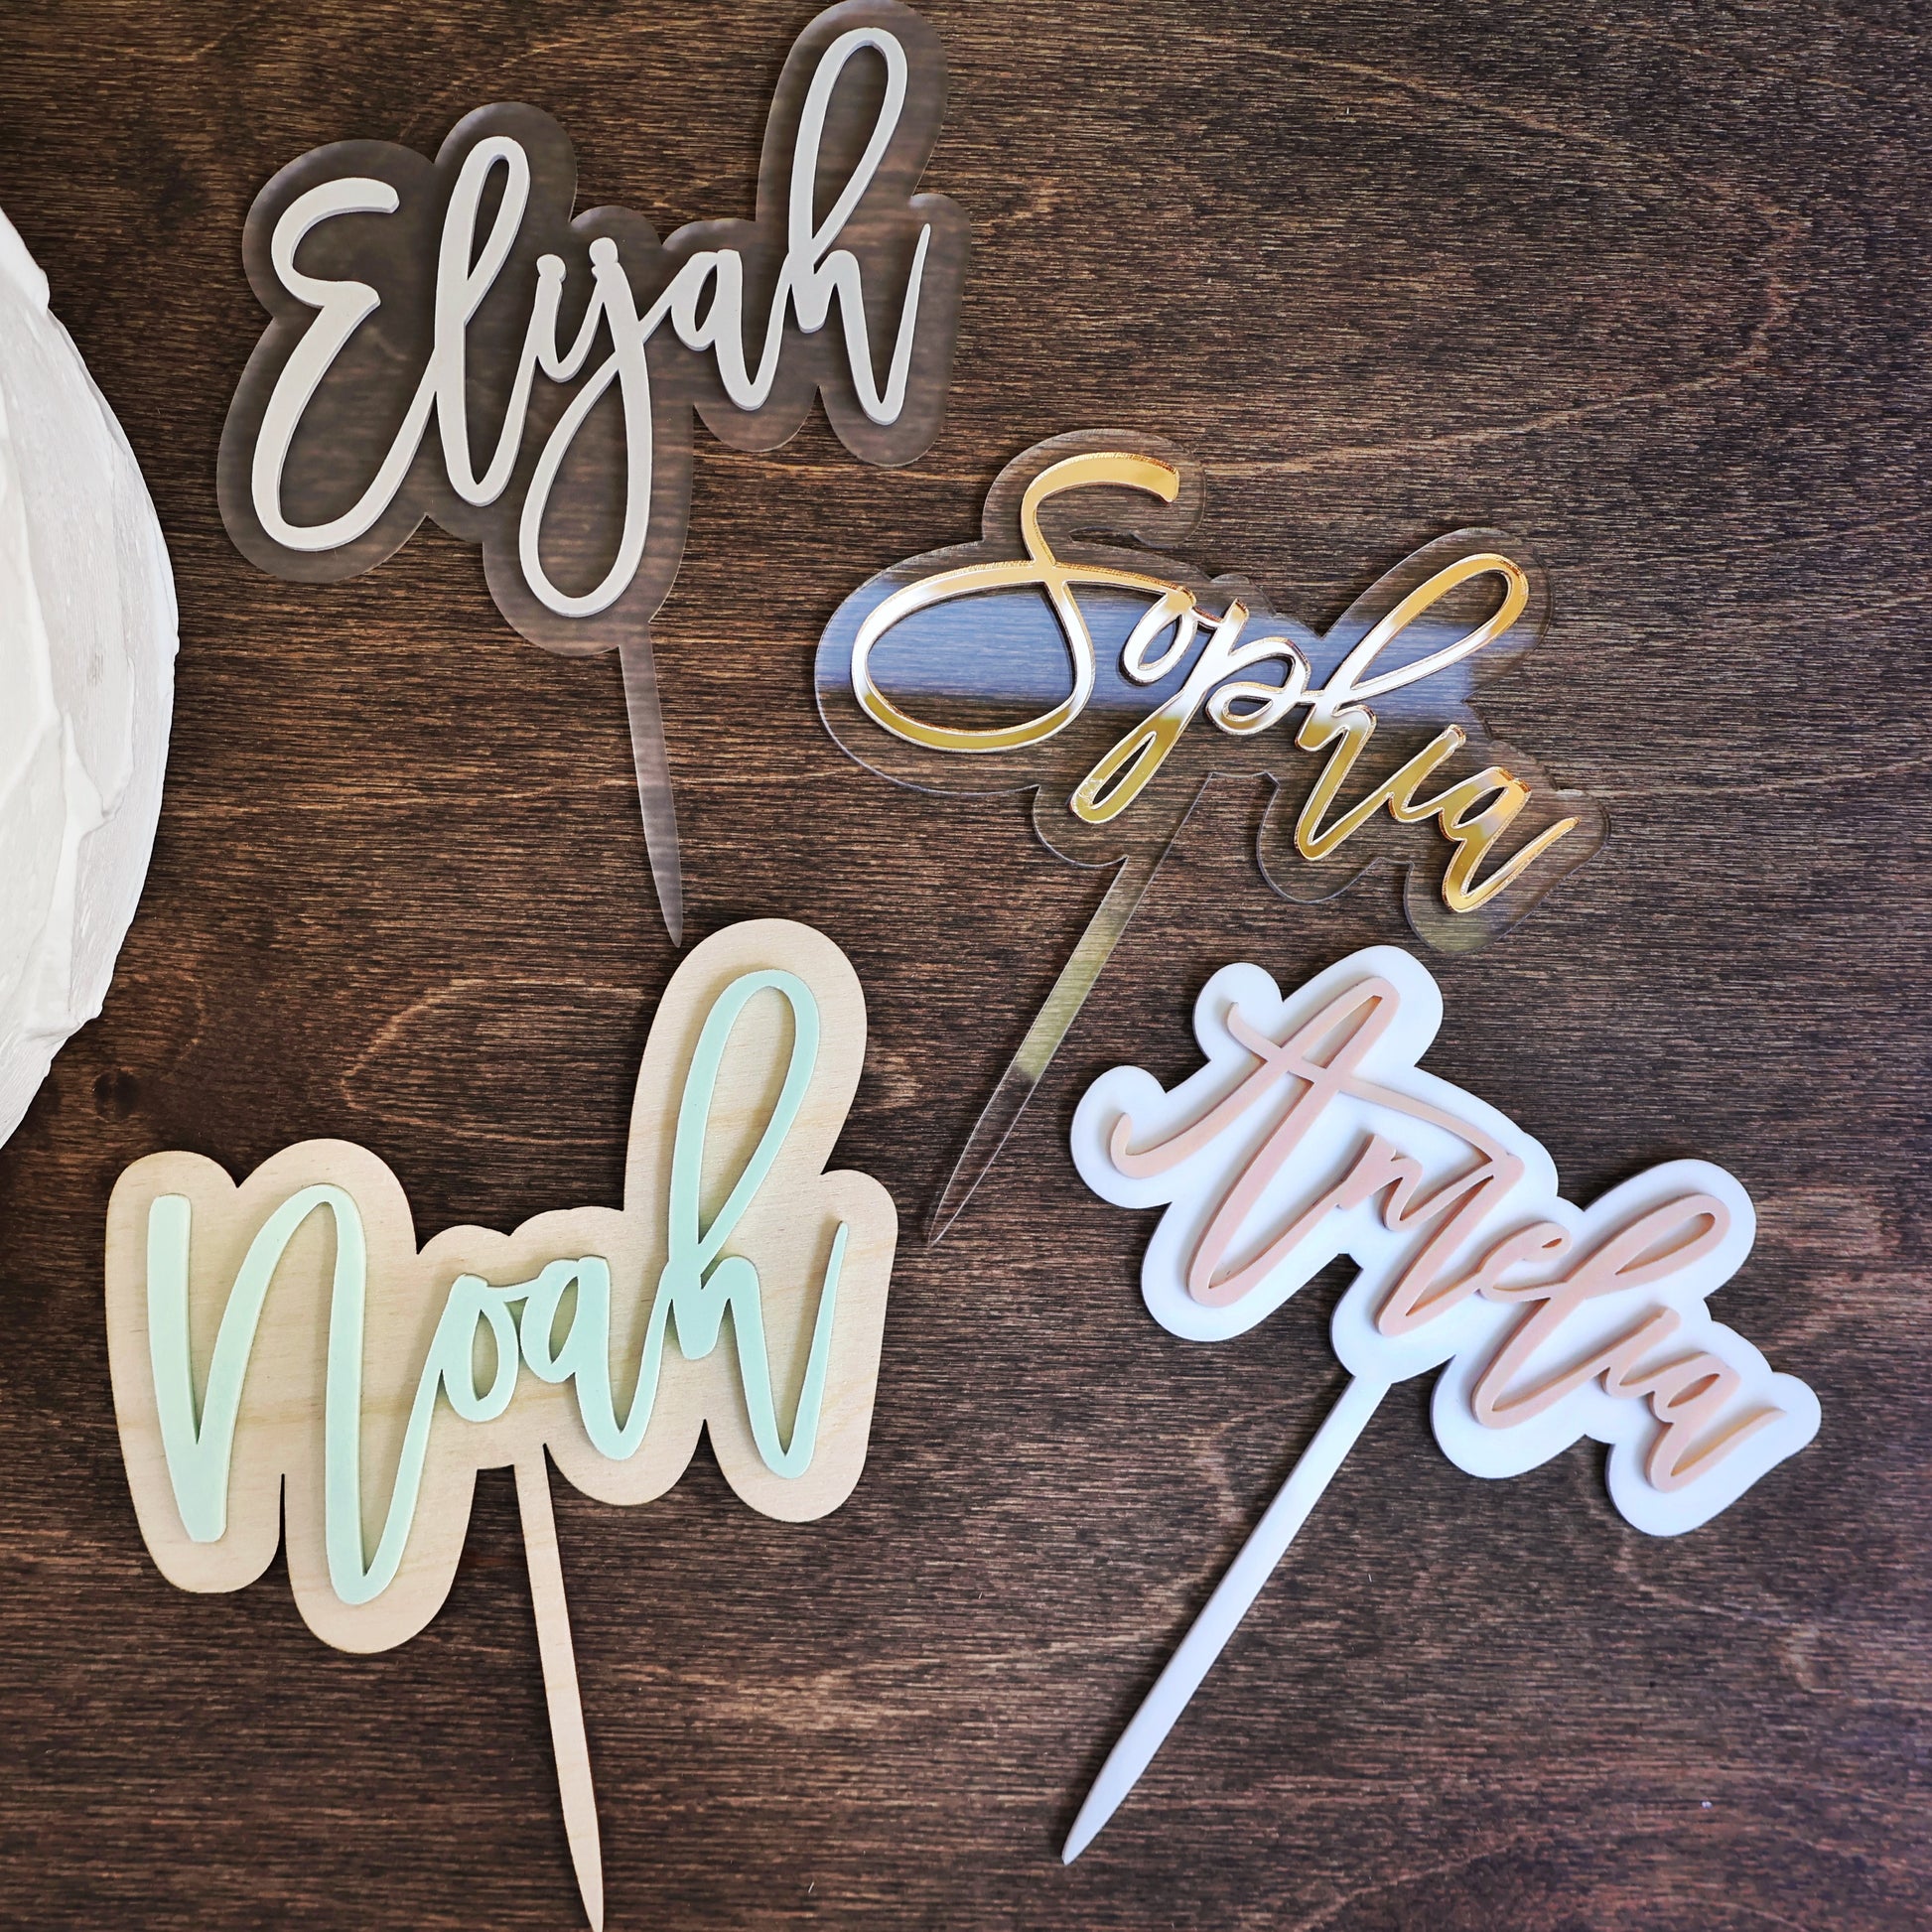 Double layer acrylic name birthday cake topper acrylic 3d custom cake toppers wedding personalized acrylic cake toppers modern pastel acrylics mirrored acrylics wood  candy bar names party decorations first birthday baptism cake bachelorette cake